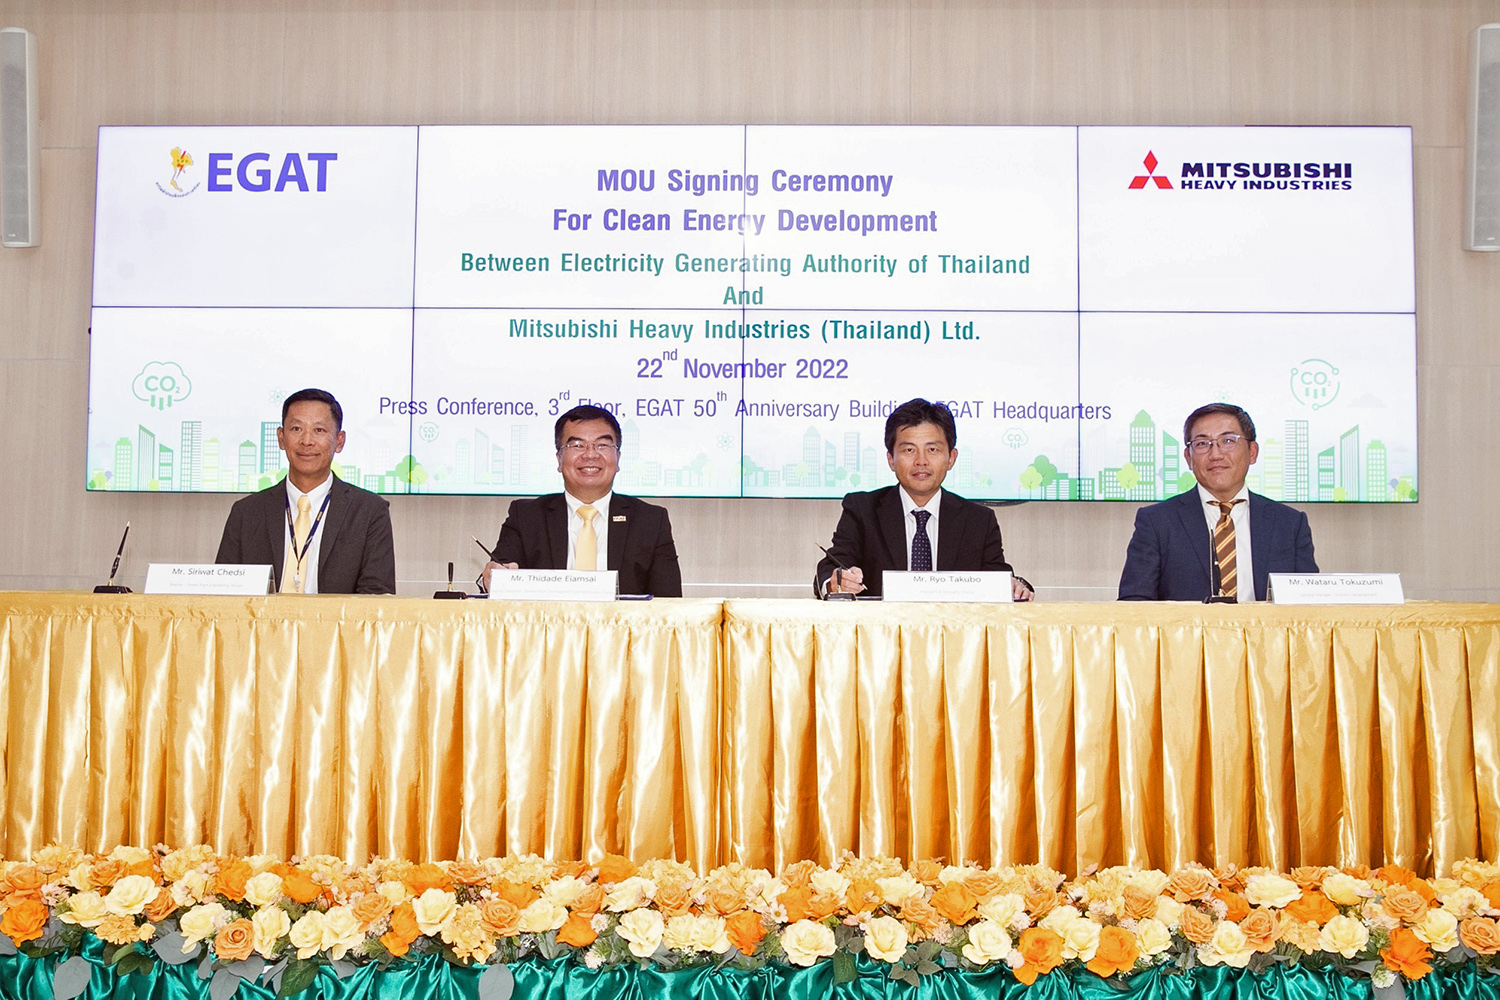 Thidade Eiamsai (Deputy Governor of Power Plant Development and Renewable Energy/EGAT) (2nd from left) and Ryo Takubo (President and Managing Director/Mitsubishi Heavy Industries (Thailand)) (3rd from left) at signing ceremony